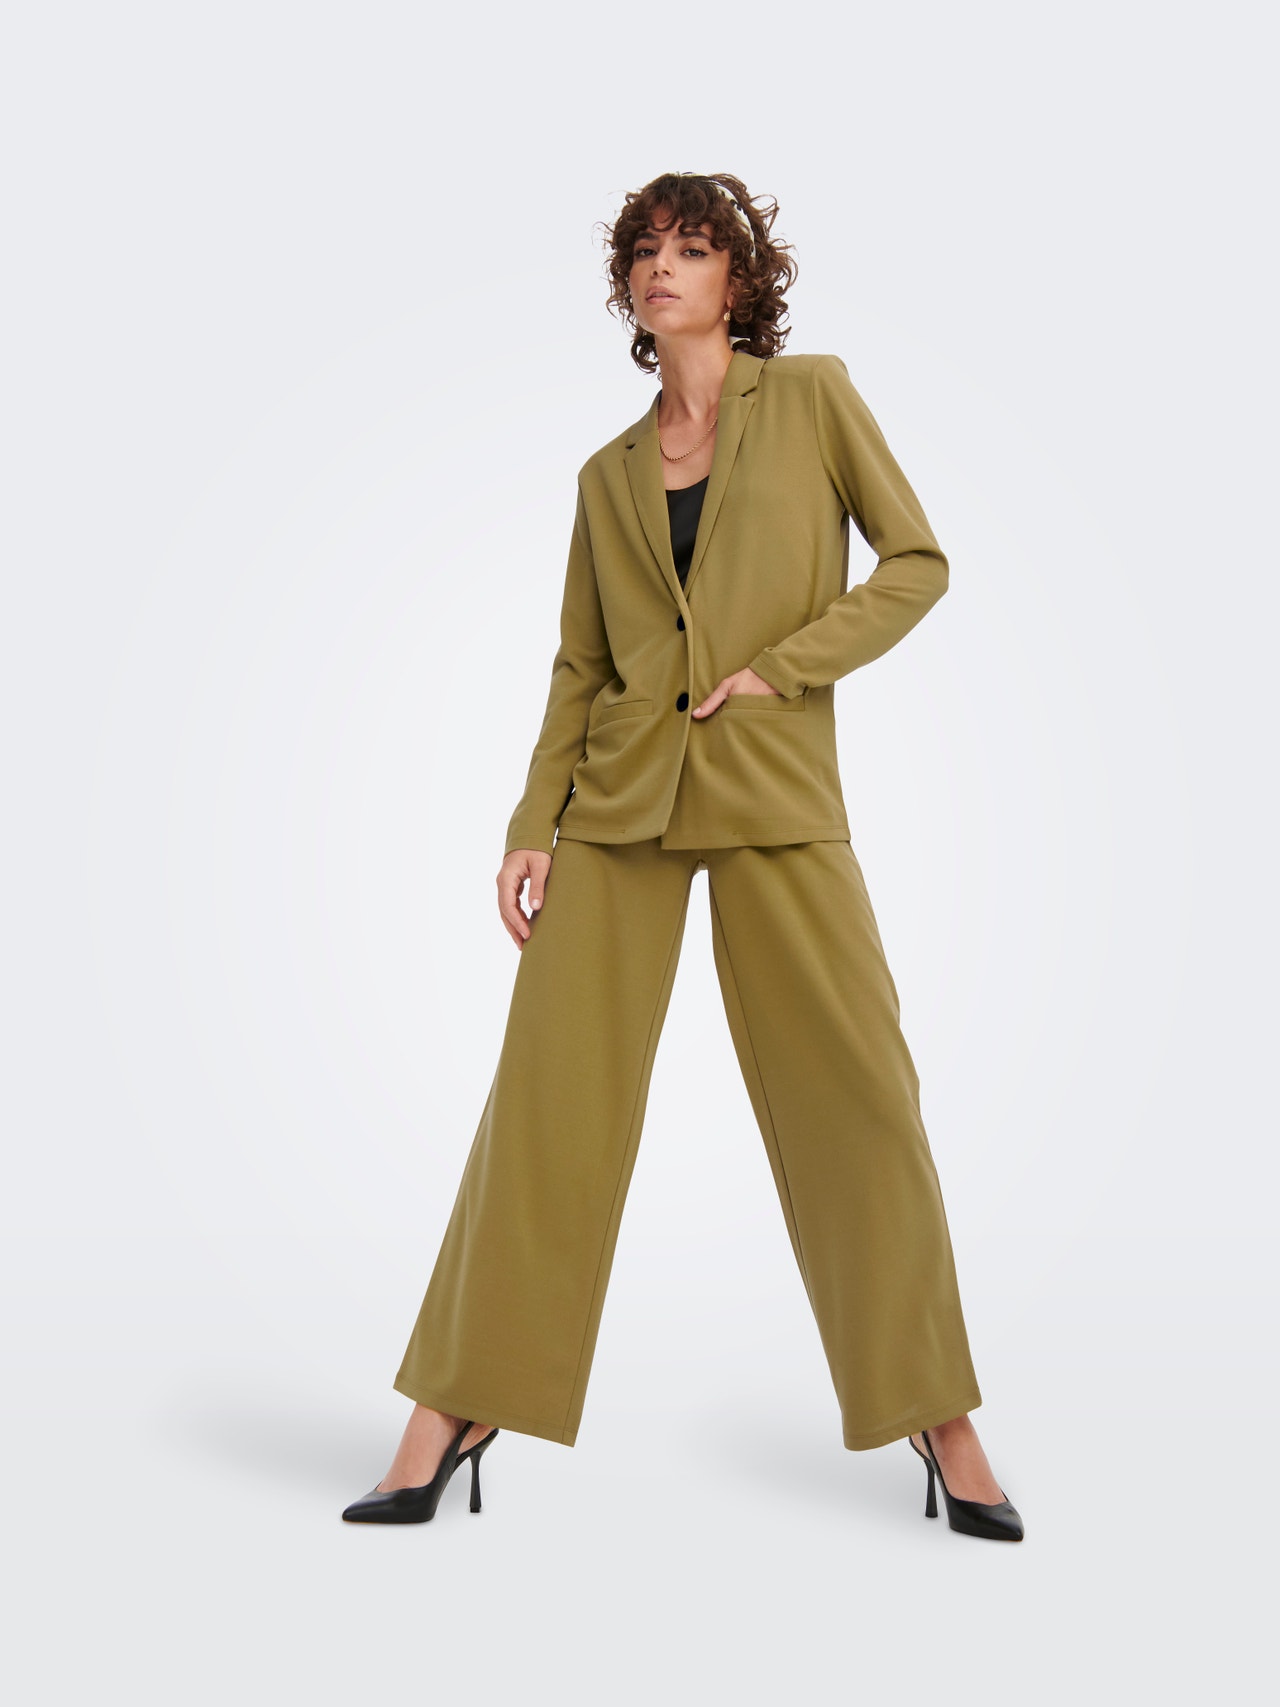 ONLY Blazer with buttons -Ecru Olive - 15221235